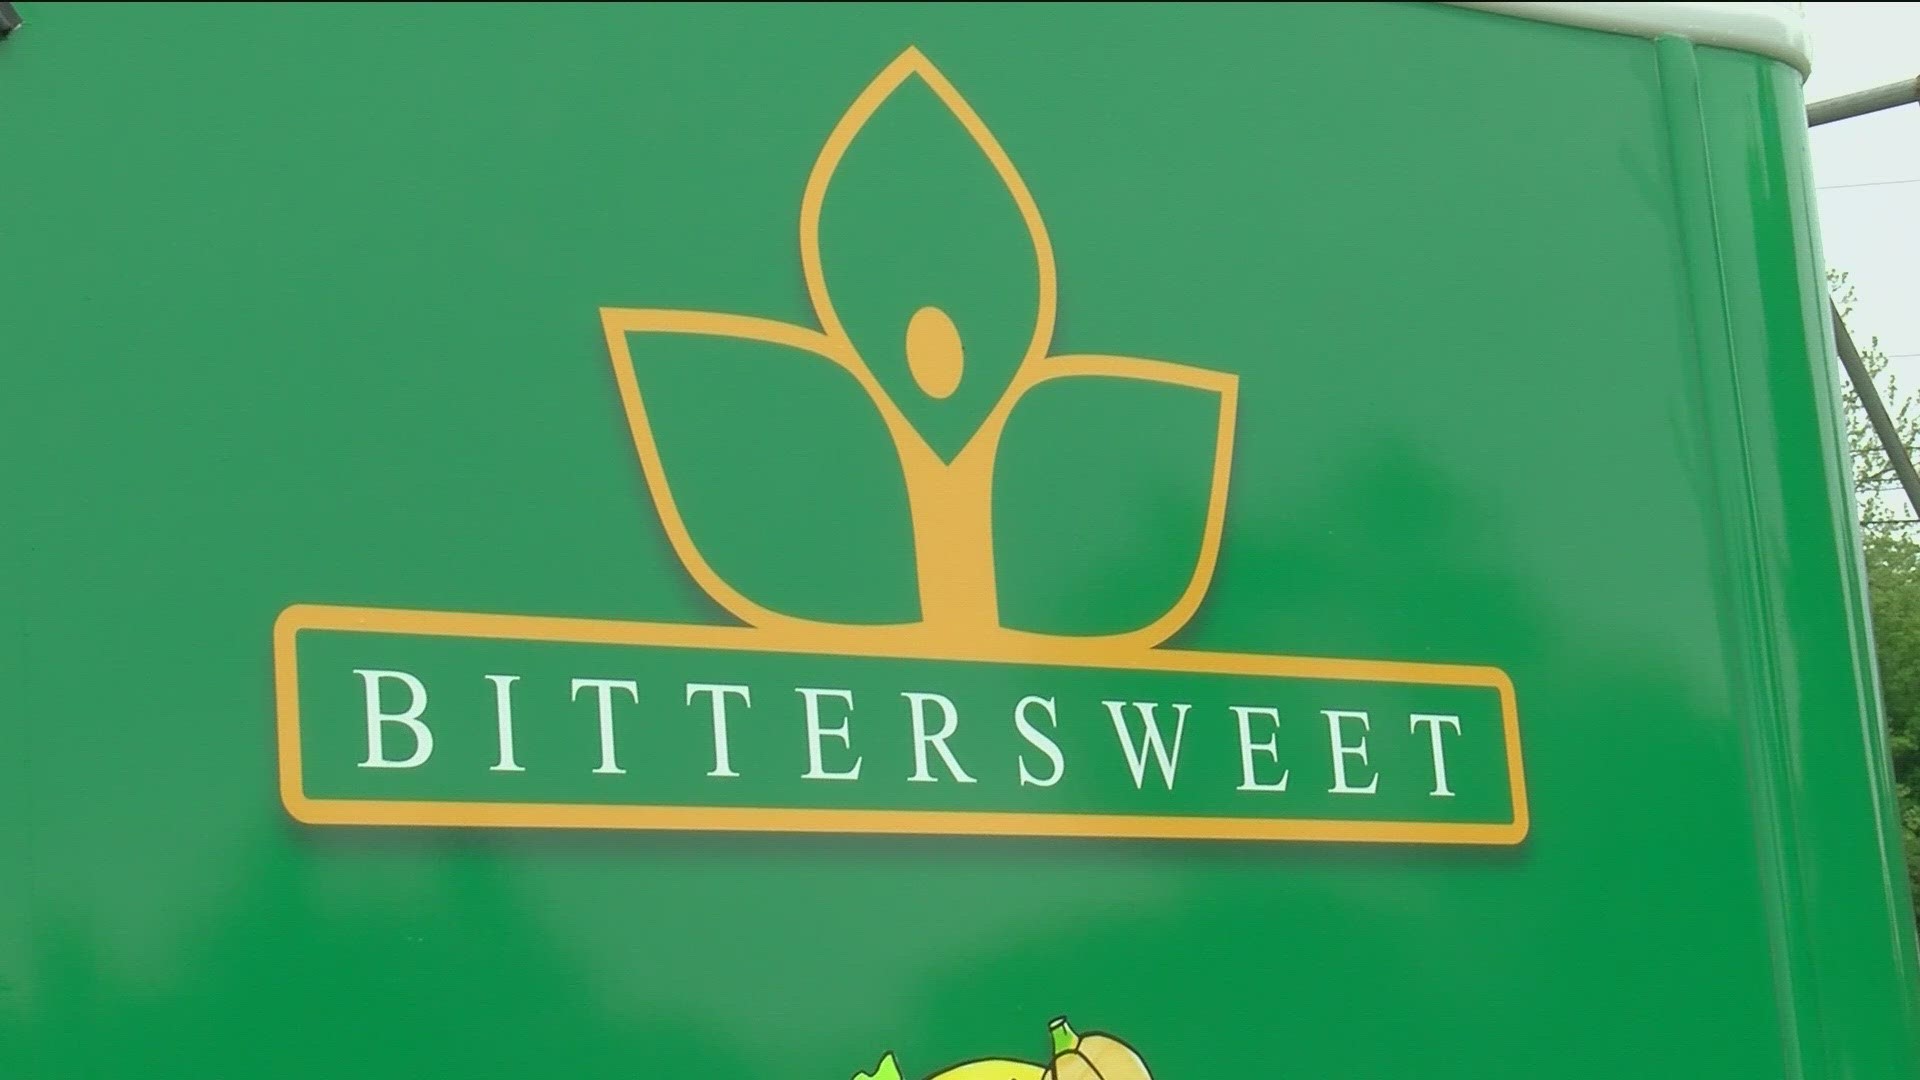 The mission of Bittersweet Farms is to positively impact the lives of individuals with autism and their loved ones through agriculture, education and support.